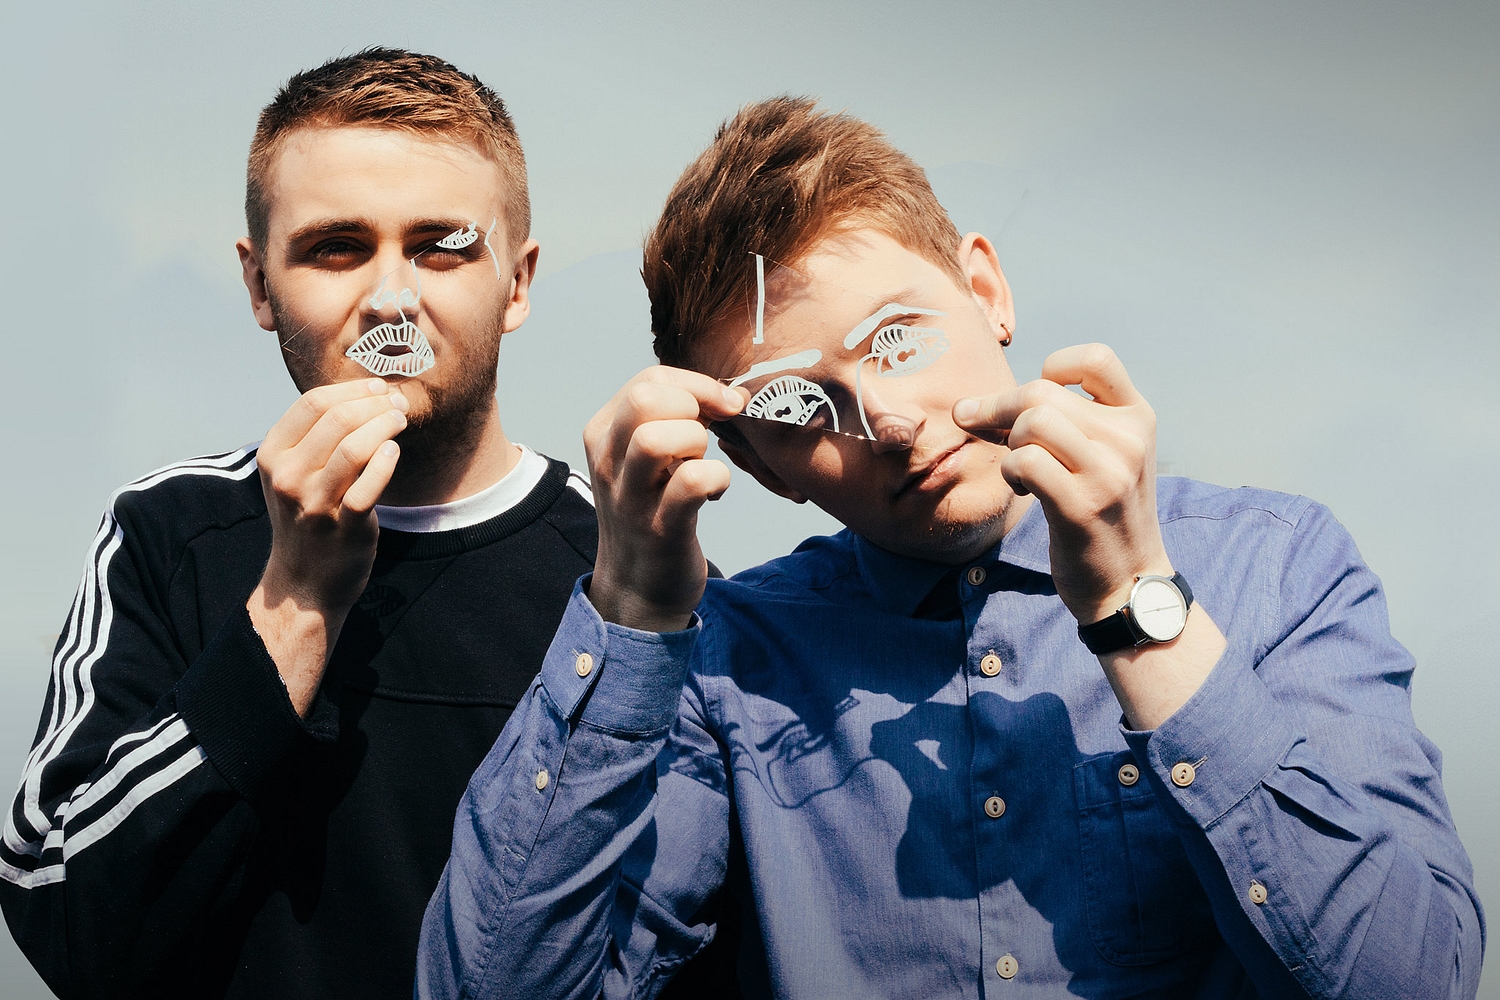 Disclosure: “We could get some horses and parade through the airport like kings”